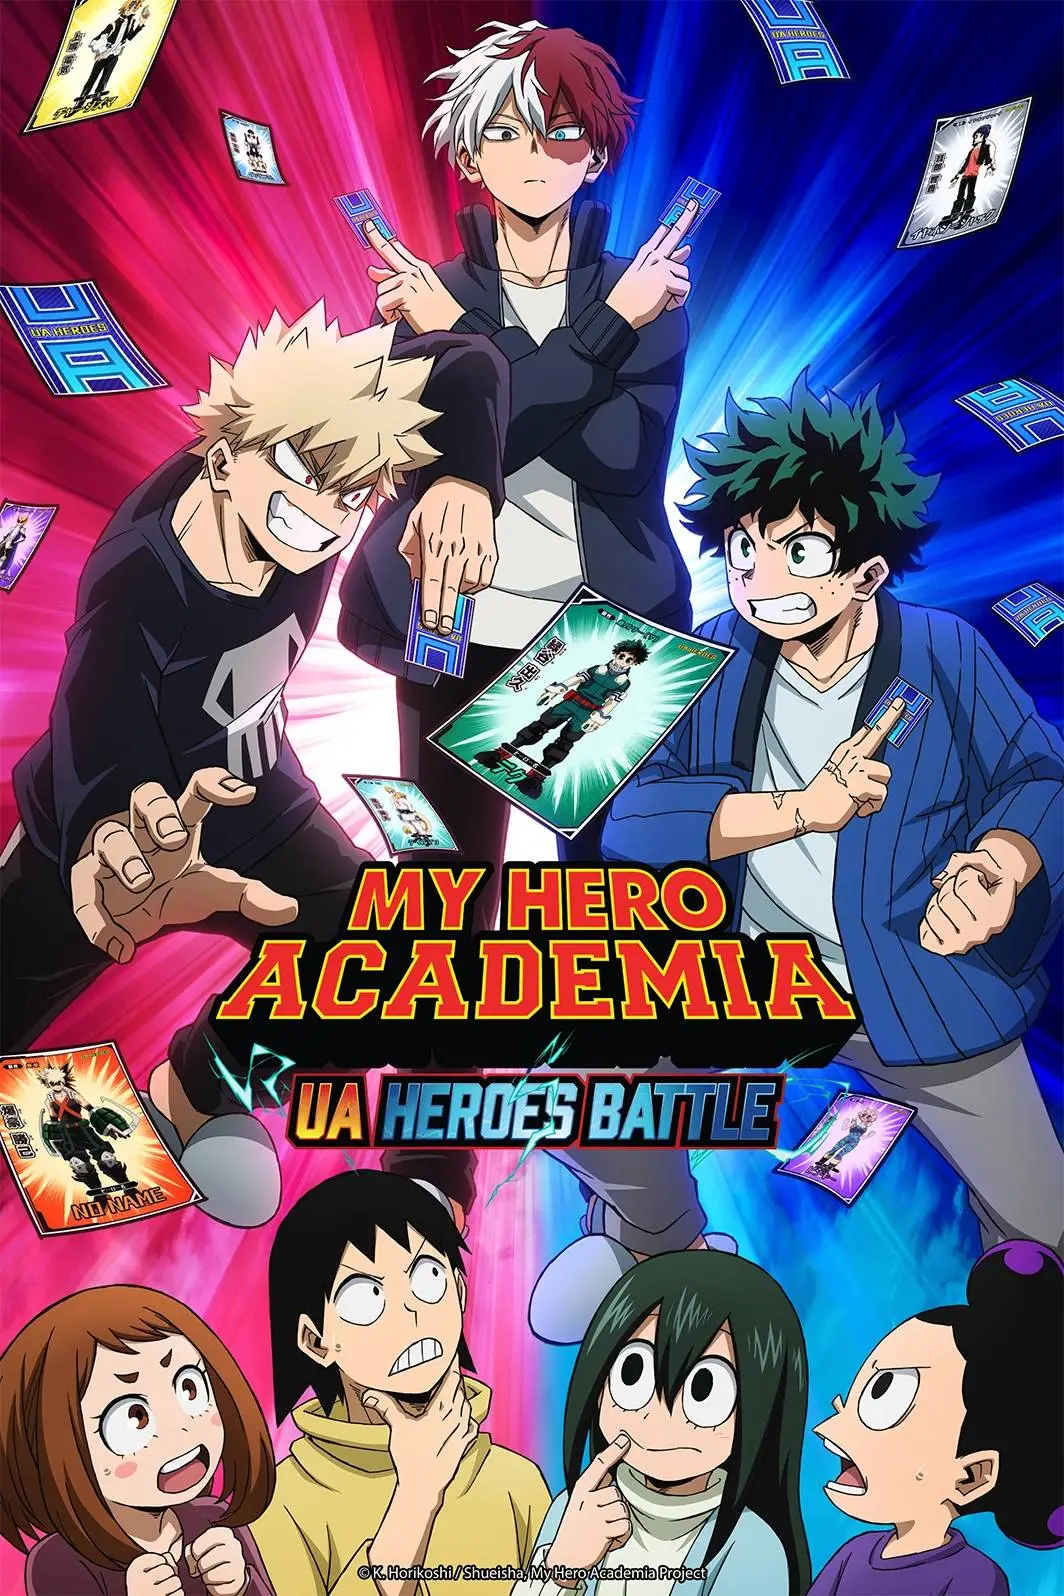 At NYCC 2023, people will be able to watch the new My Hero Academia season 6 original episode UA Battle Heroes.